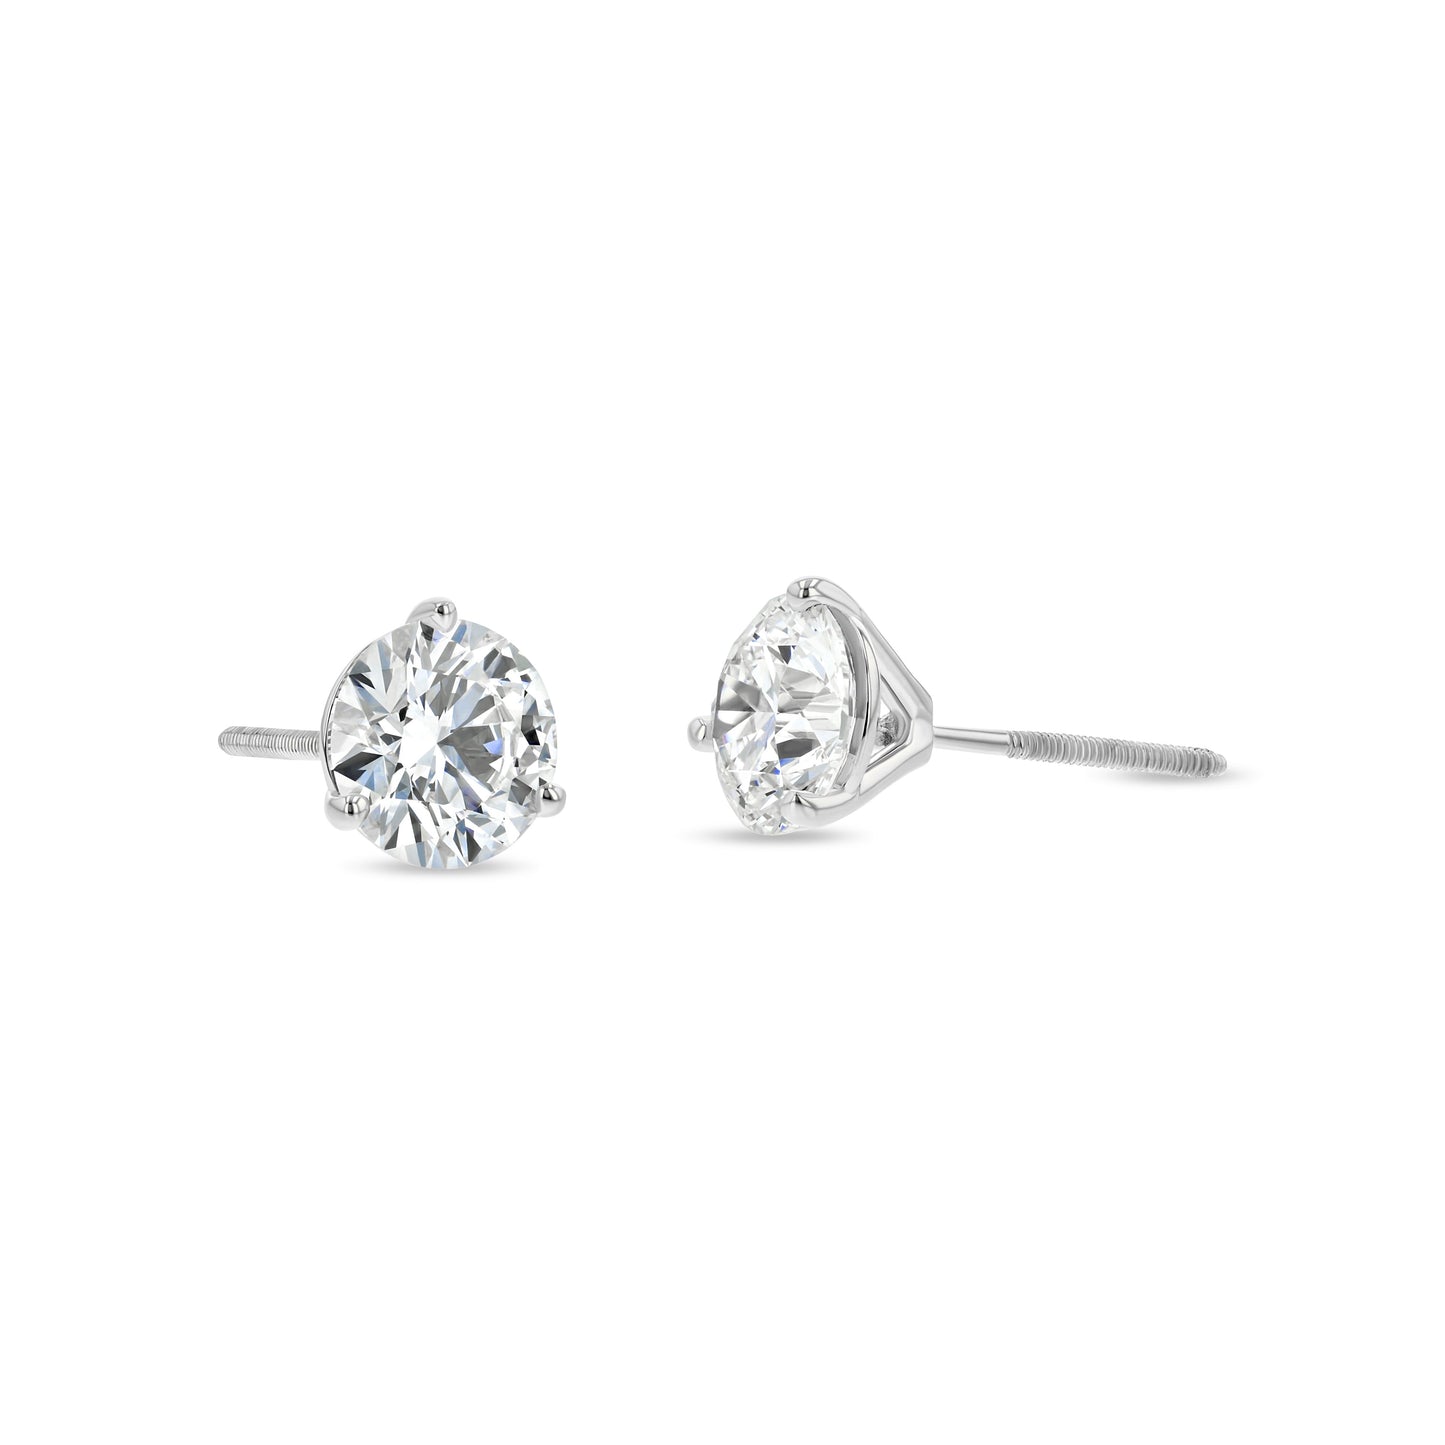 14k White Gold 3-prong Round Brilliant Diamond Stud Earrings (0.32 Ct. T.w., Si1-si2 Clarity, J-k Color)